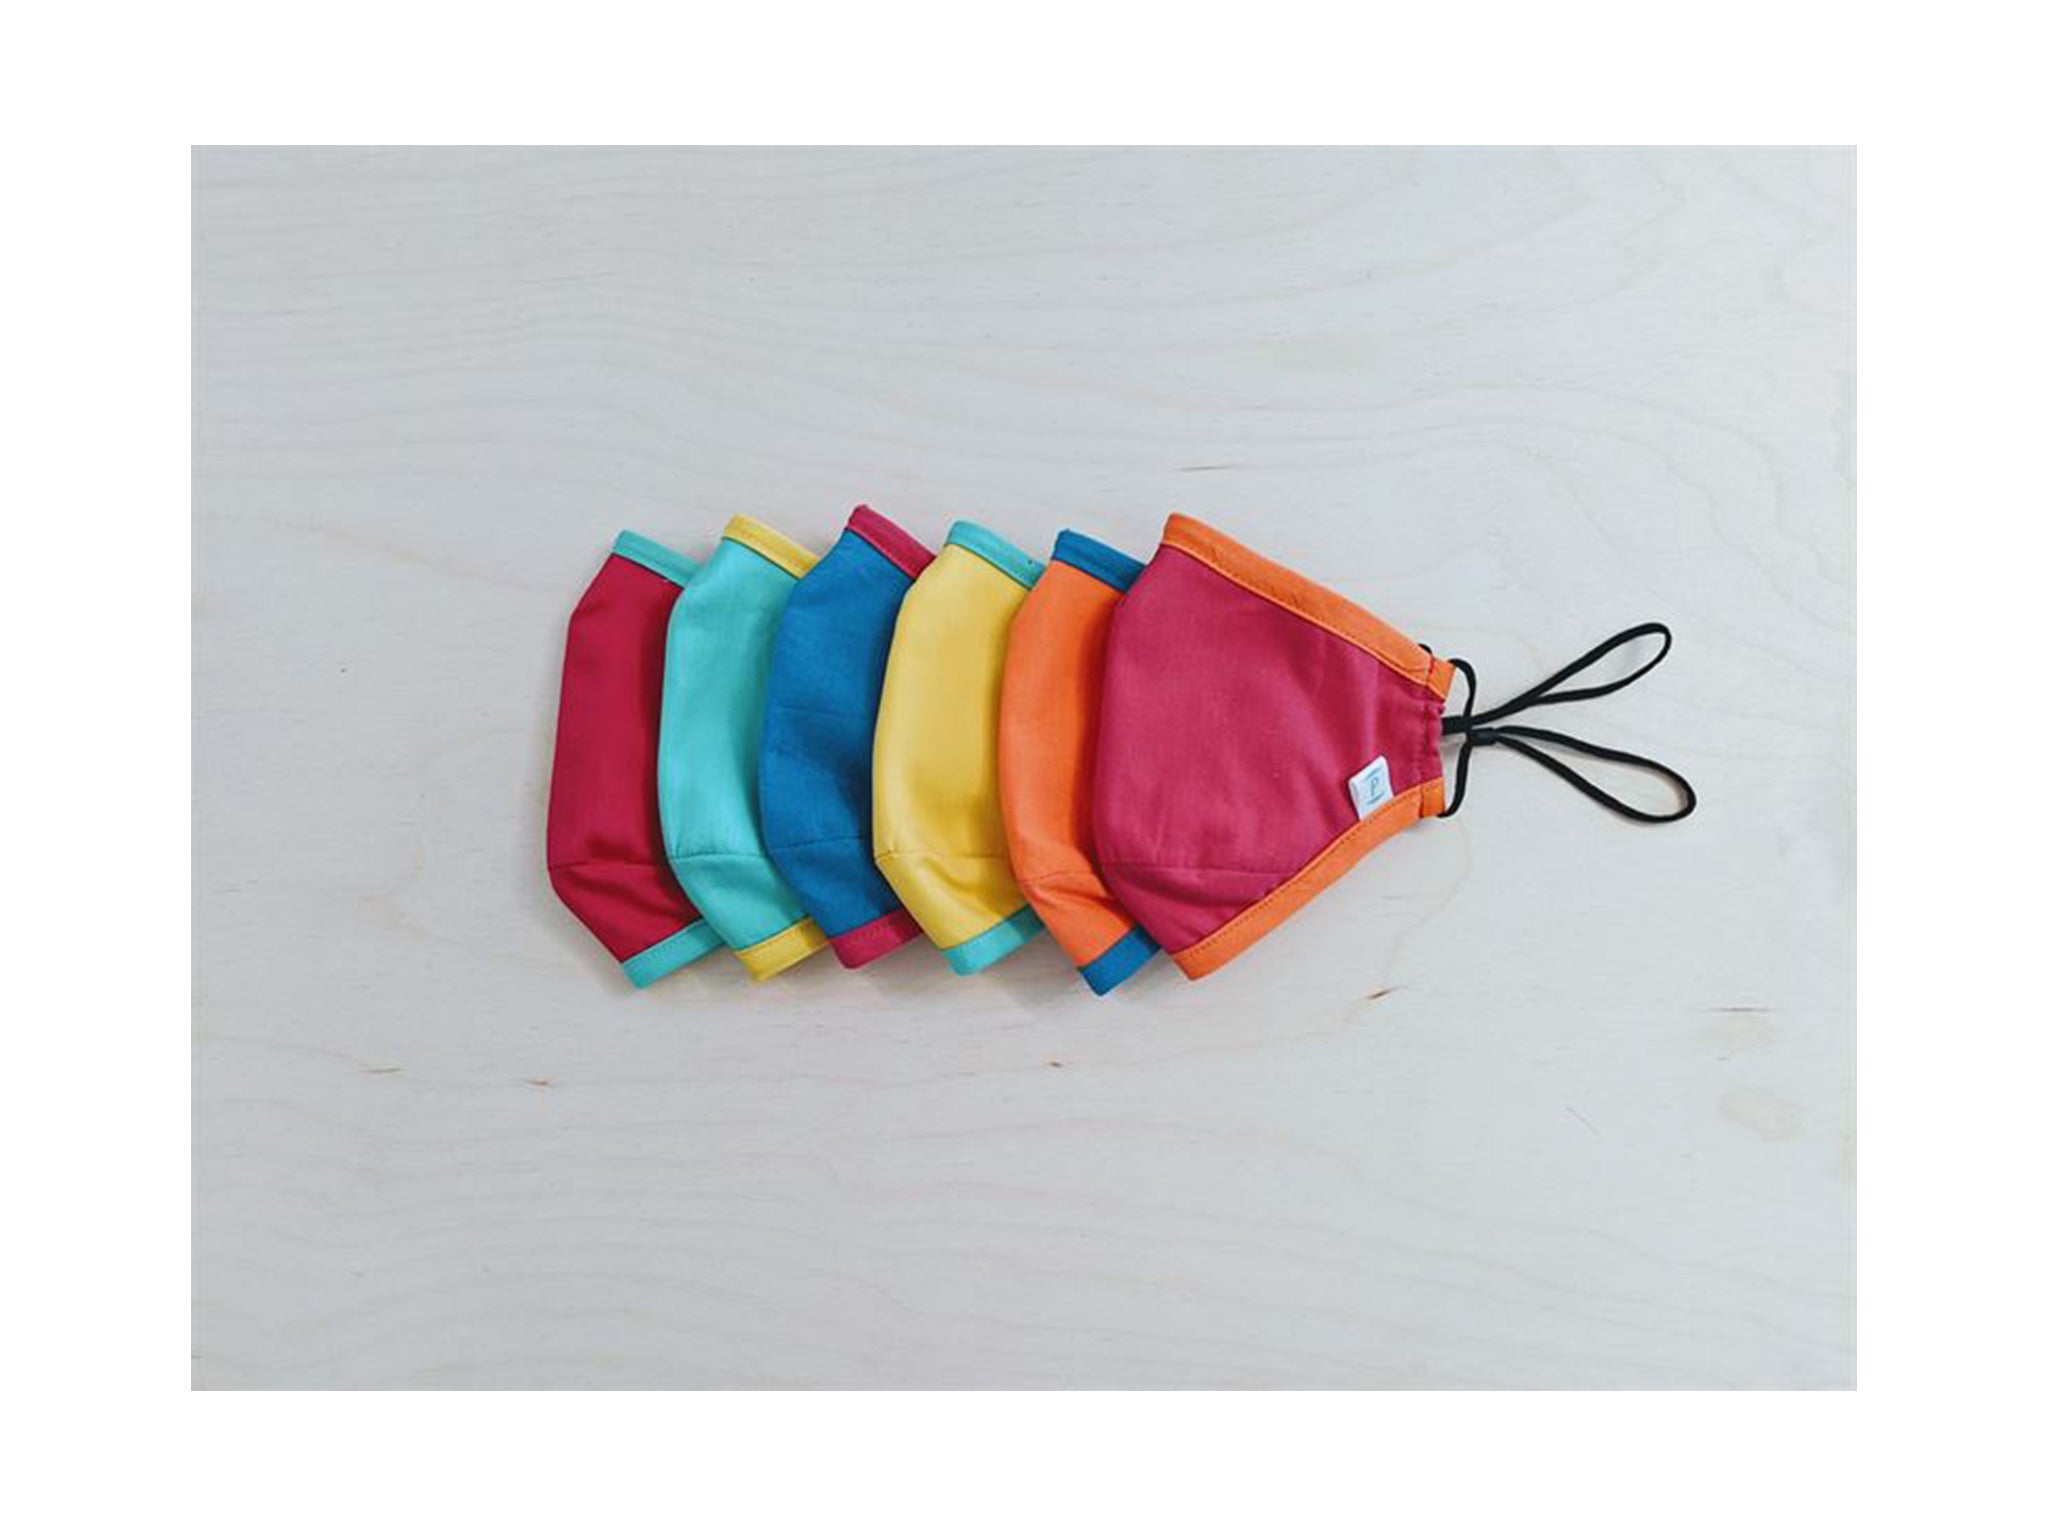 Colourful and fun, these comfortable cotton masks are an eye-catching, feel-good purchase